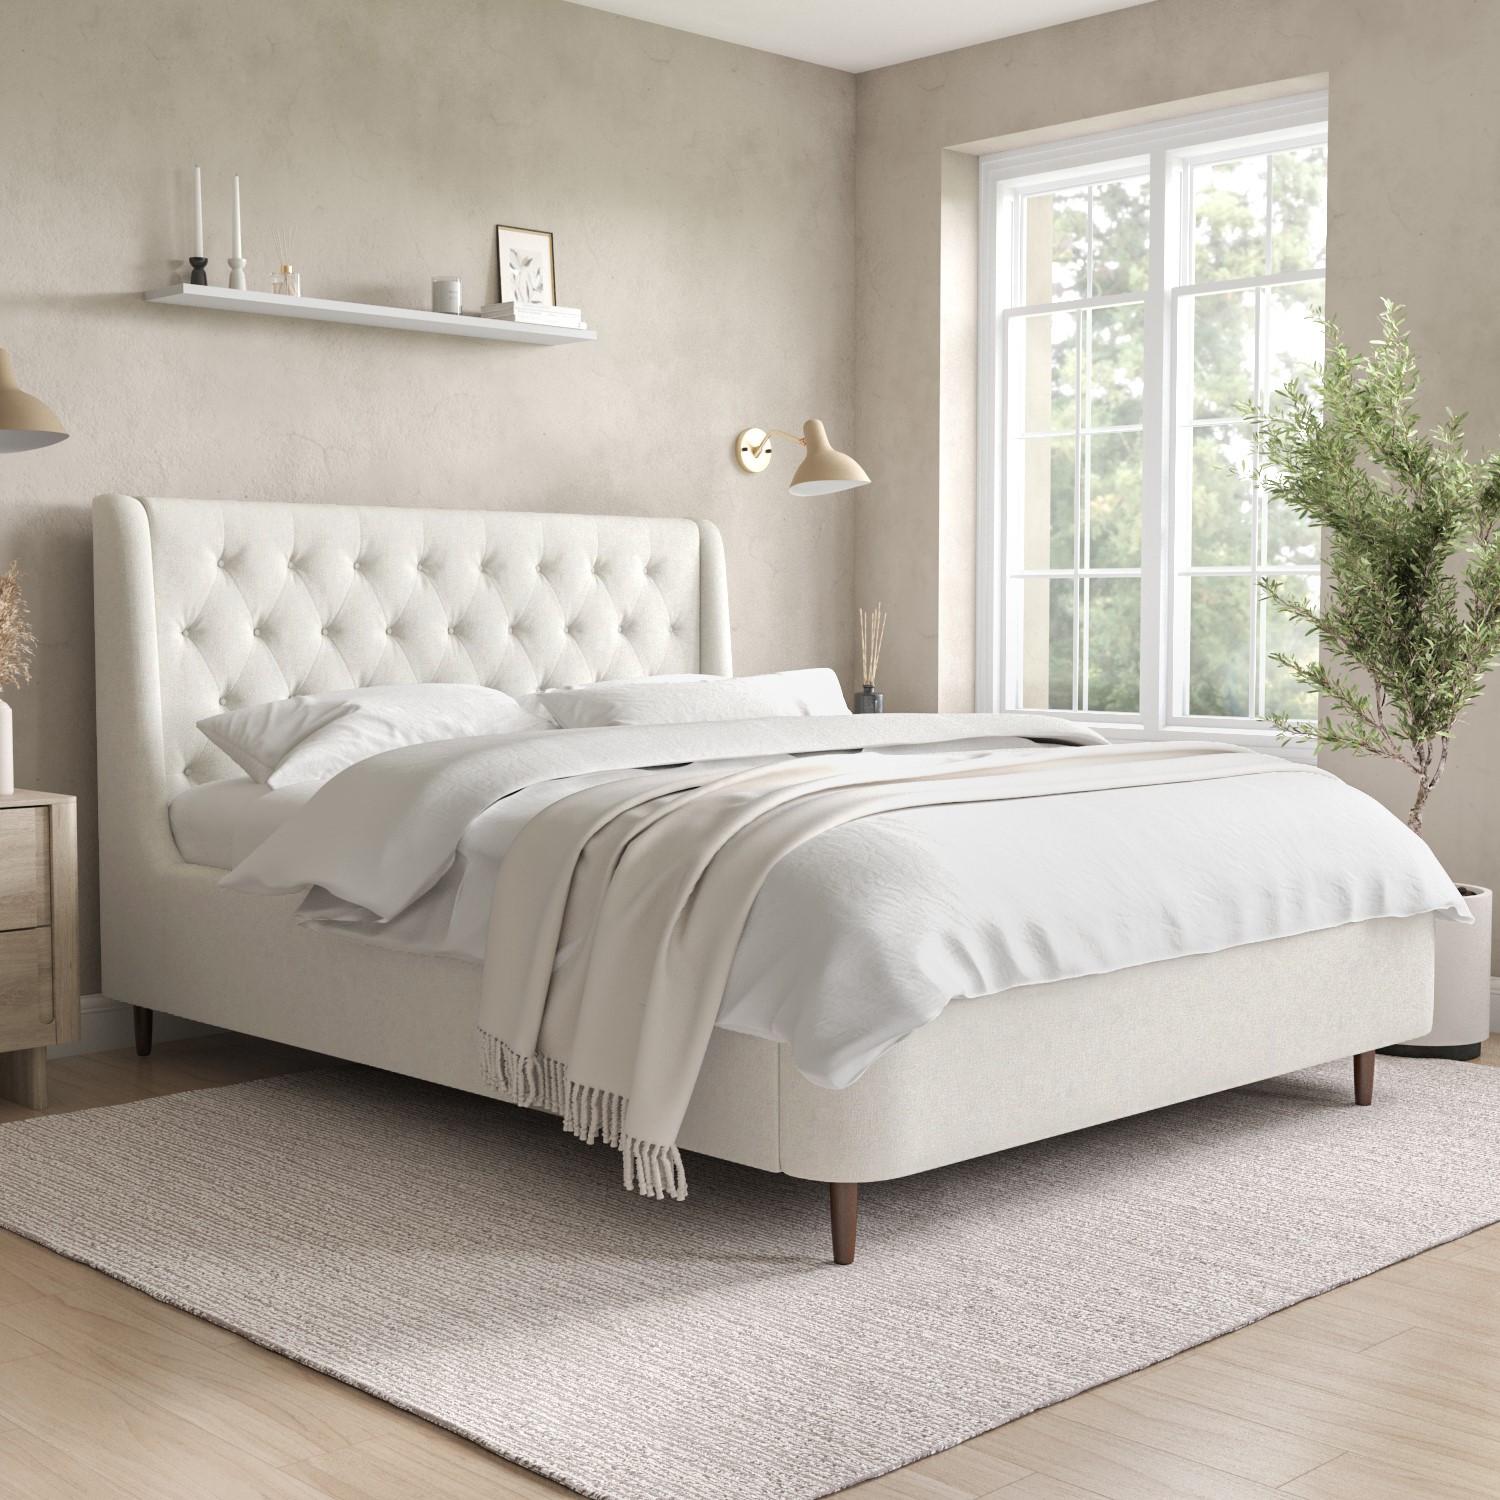 Photo of Cream fabric king size ottoman bed with legs - amara